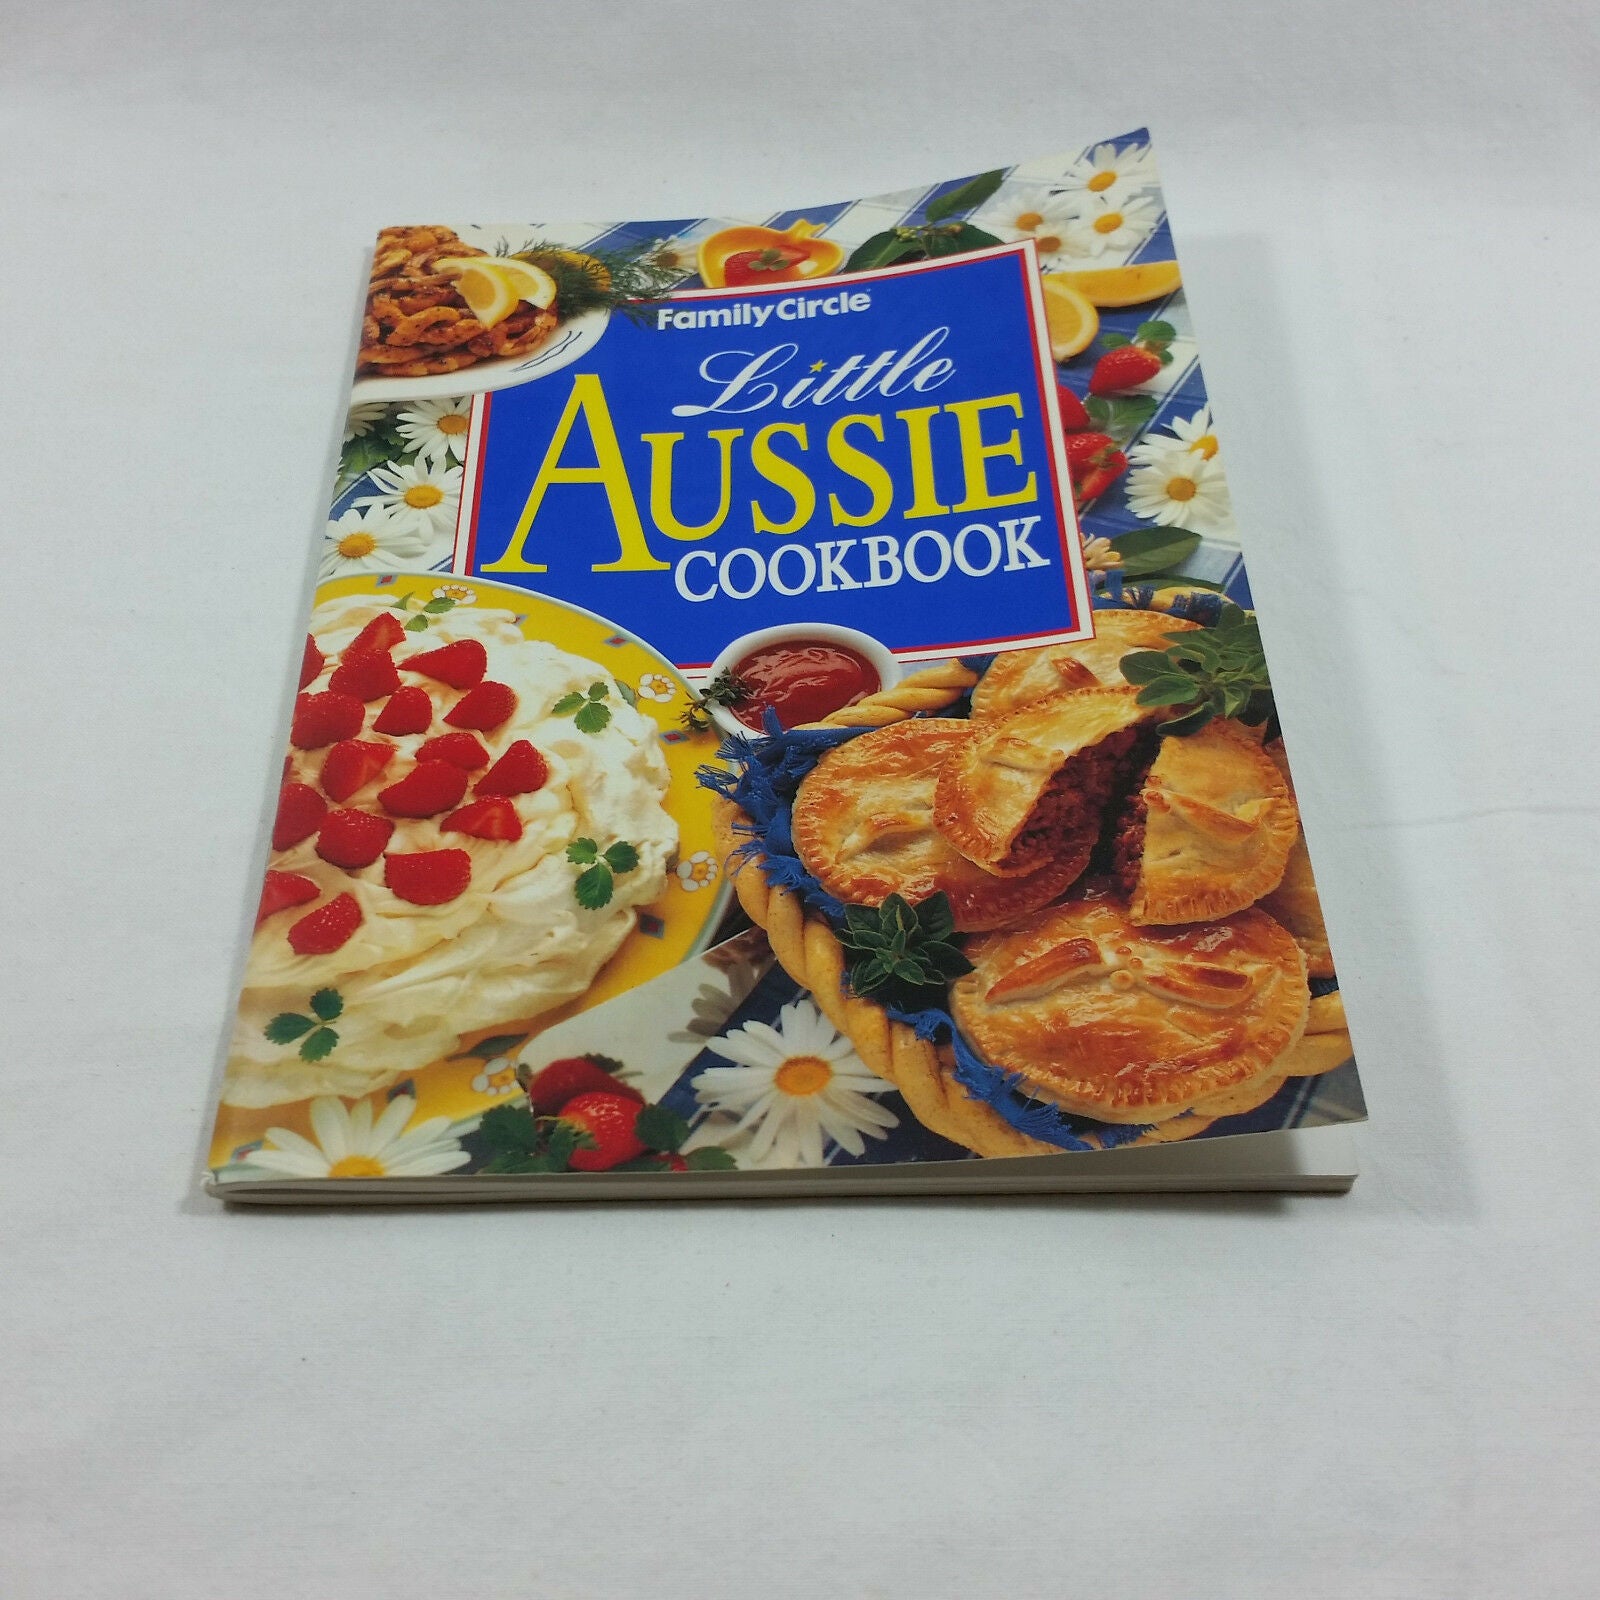 Vintage Australia Little Aussie Cookbook Family Circle Confident Cooking Booklet - At Grandma's Table